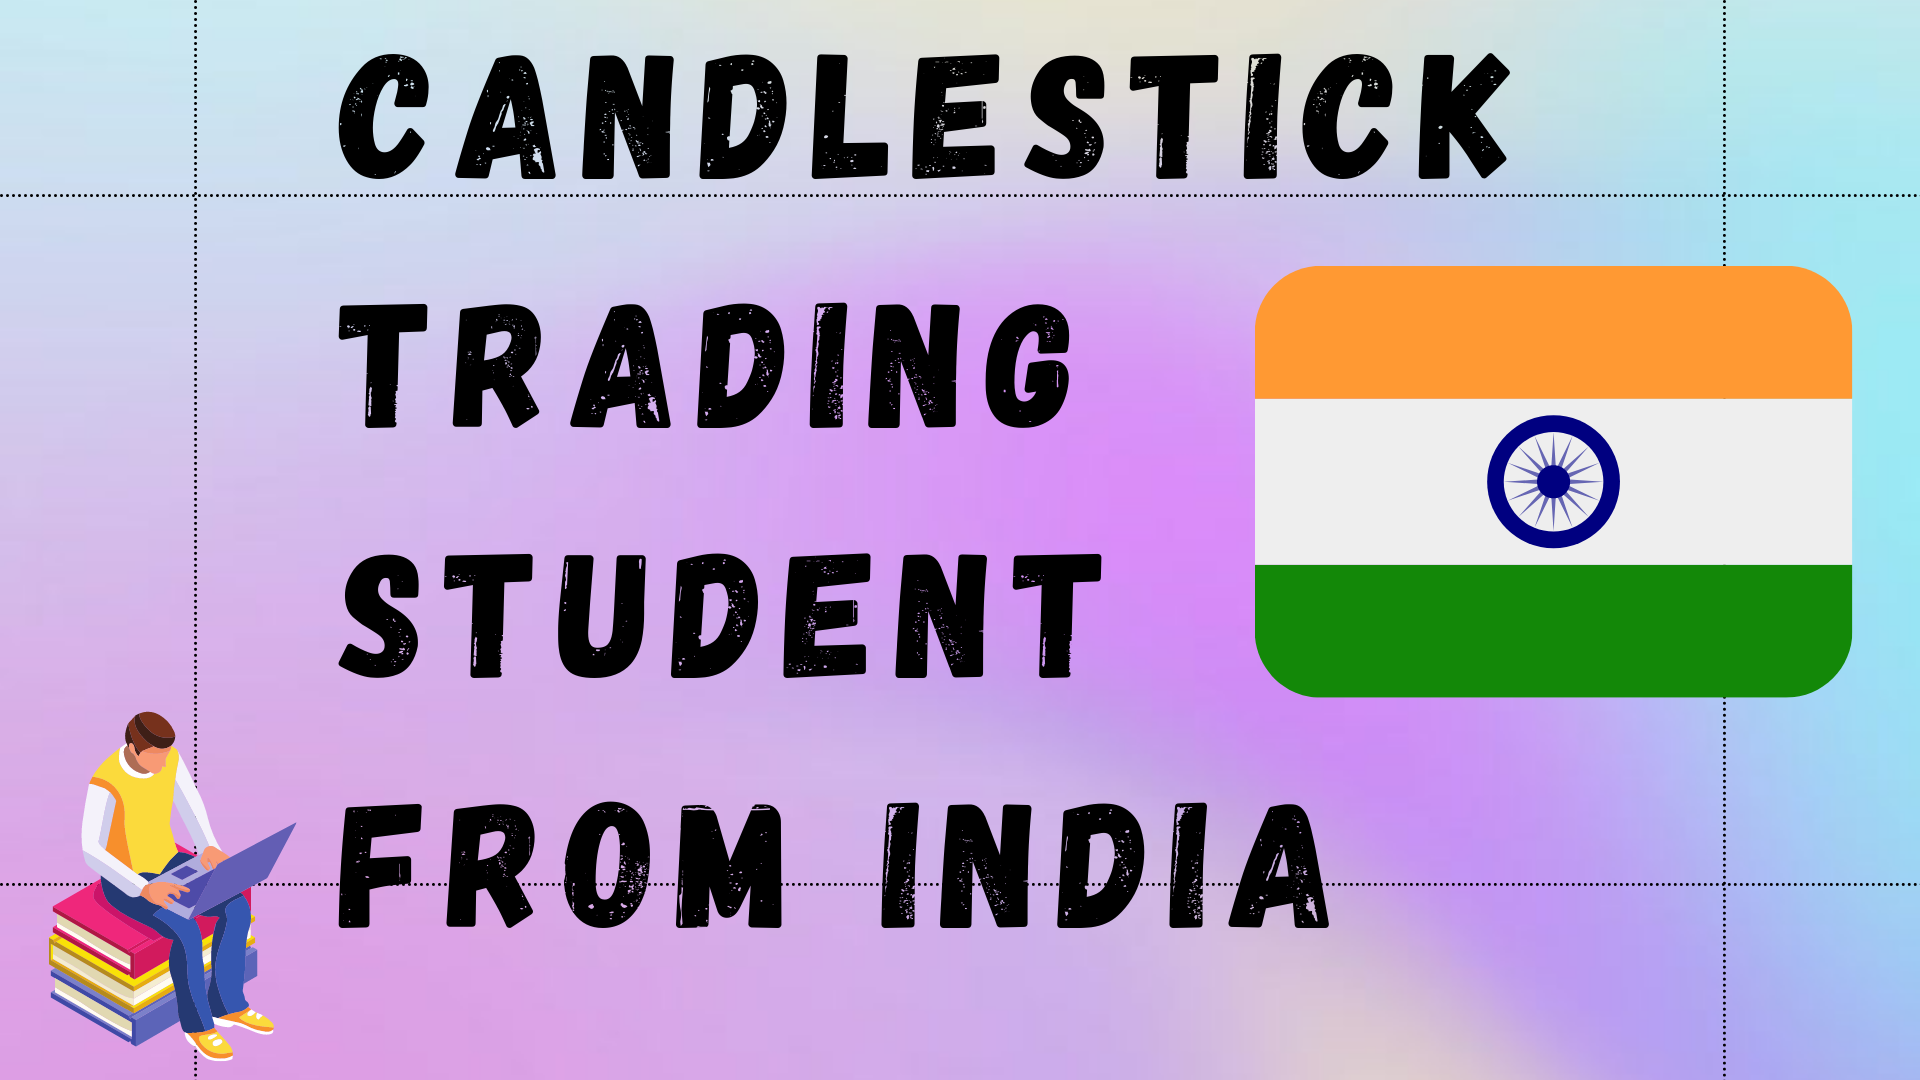 candlestick trading student from india trade NSE market